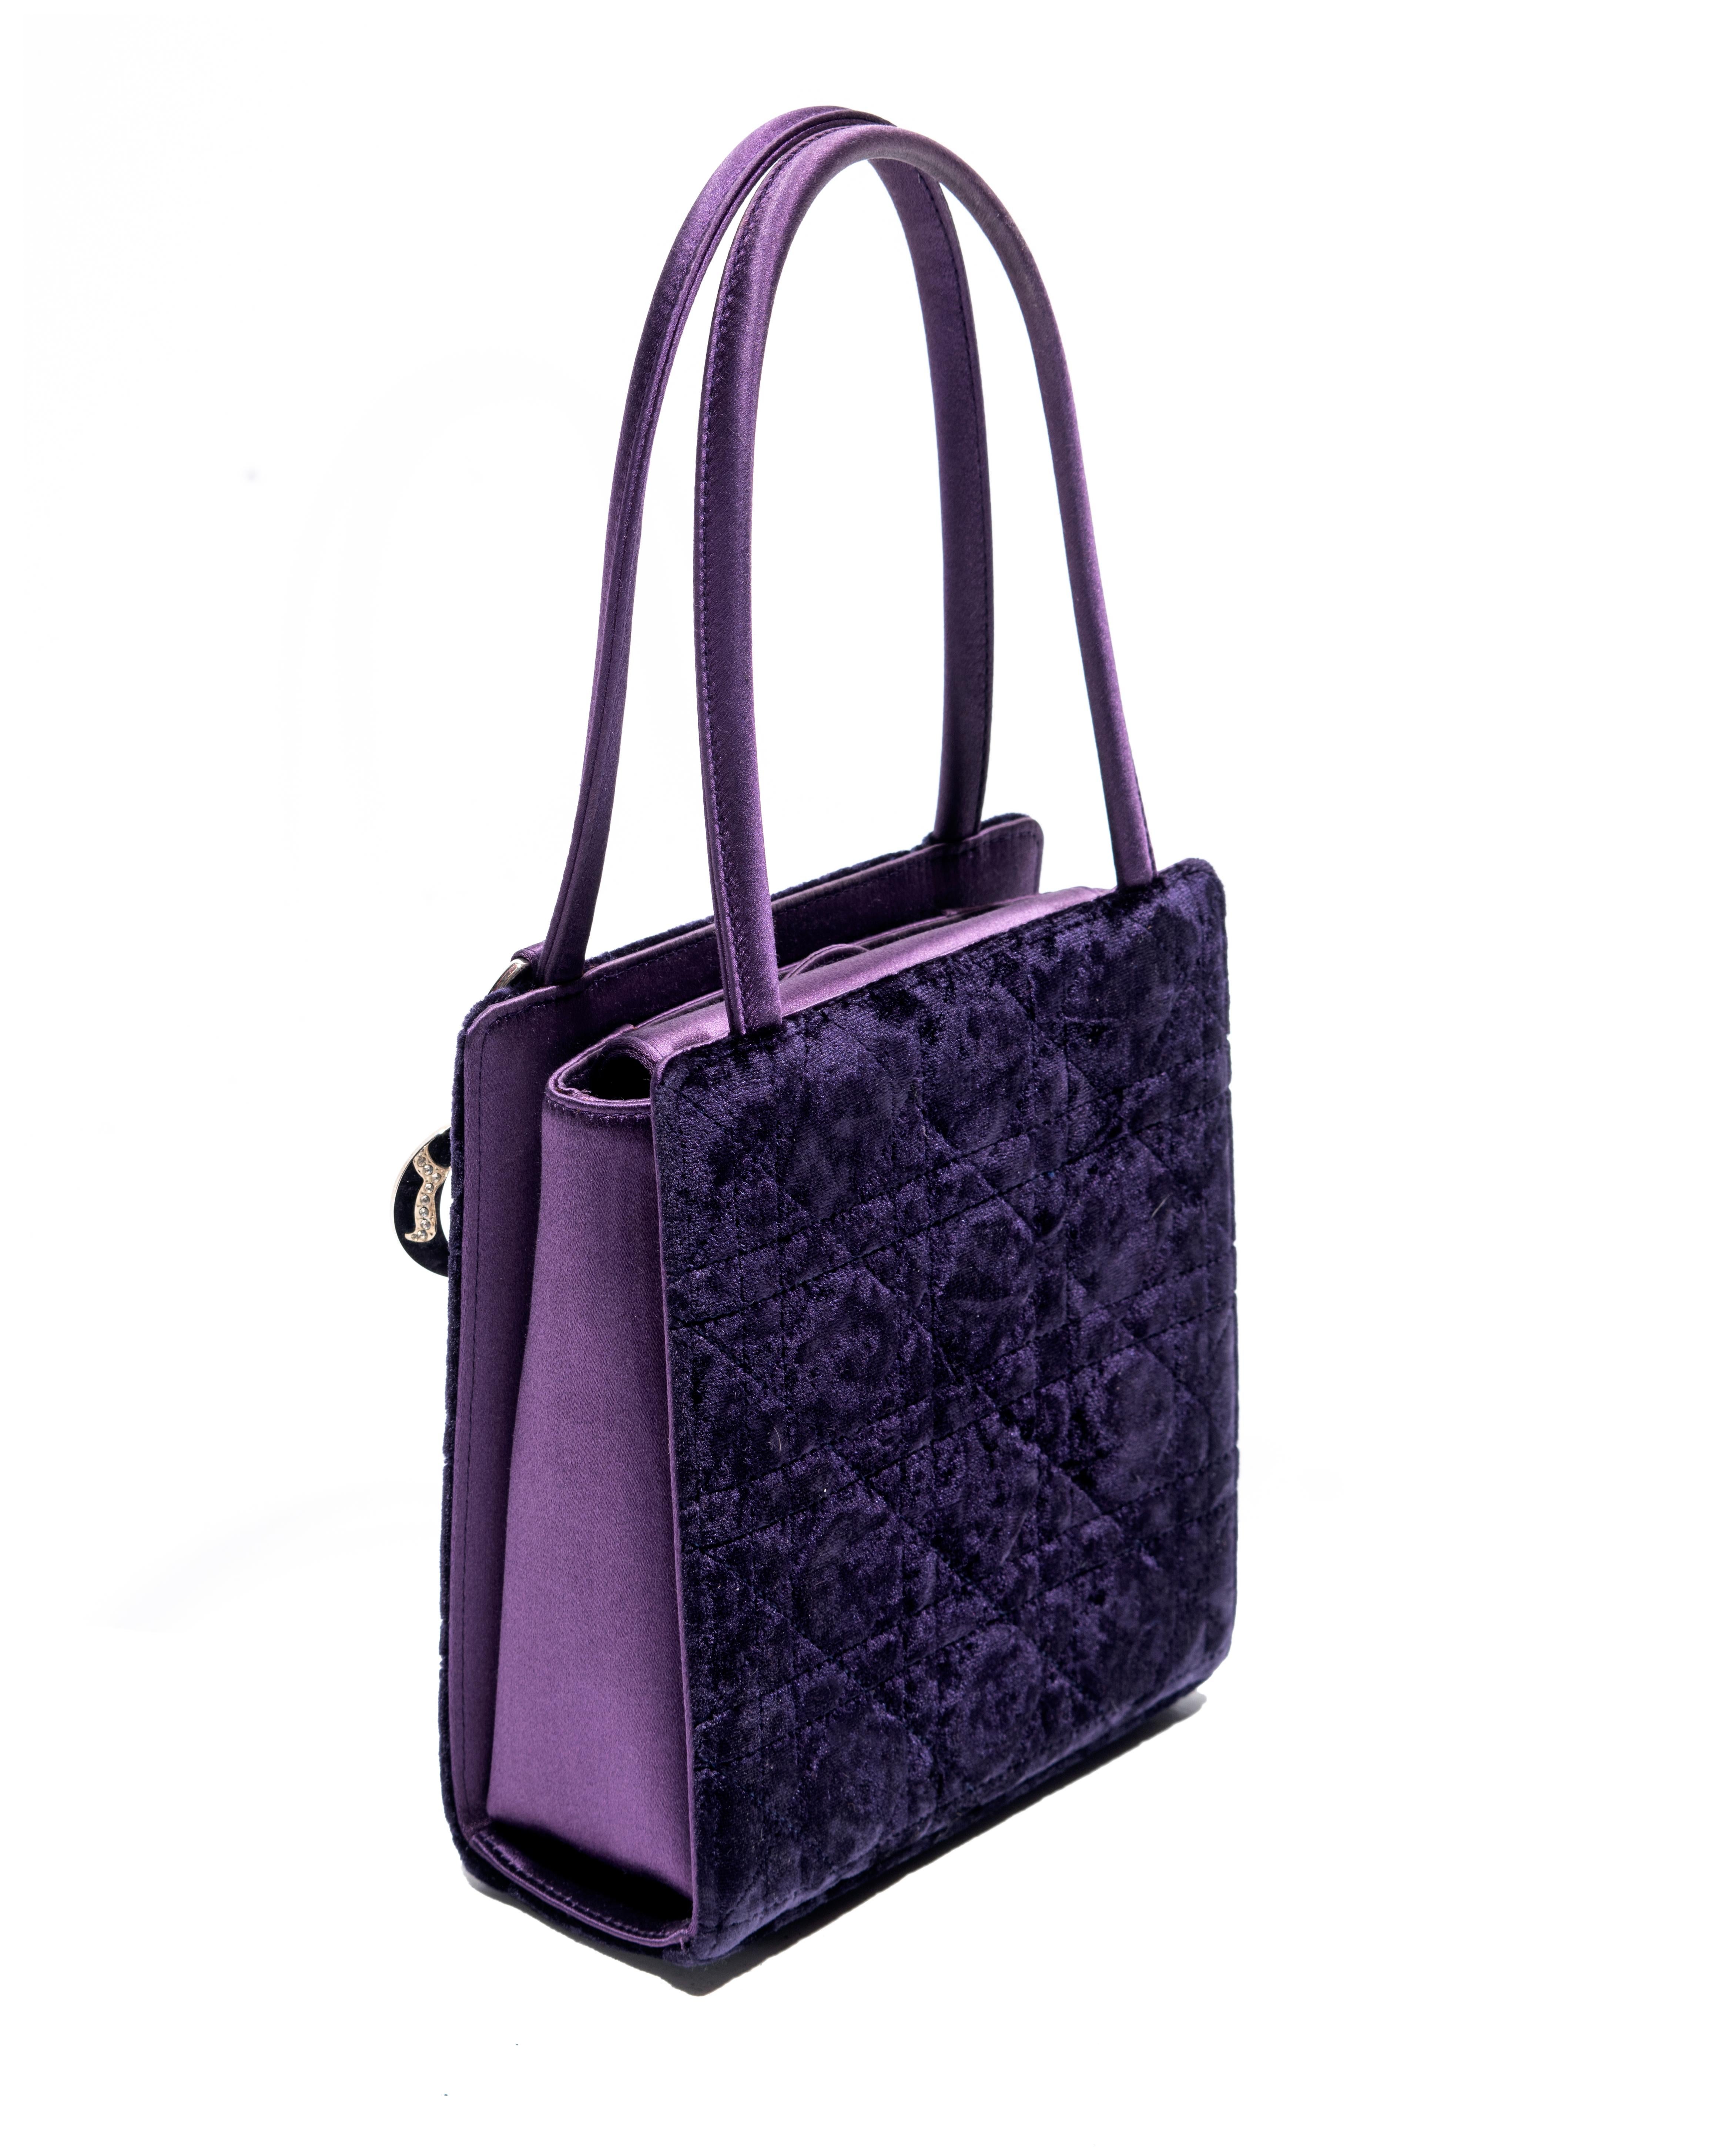 Christian Dior by John Galliano purple velvet and crystal mini bag, c. 1998 In Excellent Condition For Sale In London, GB